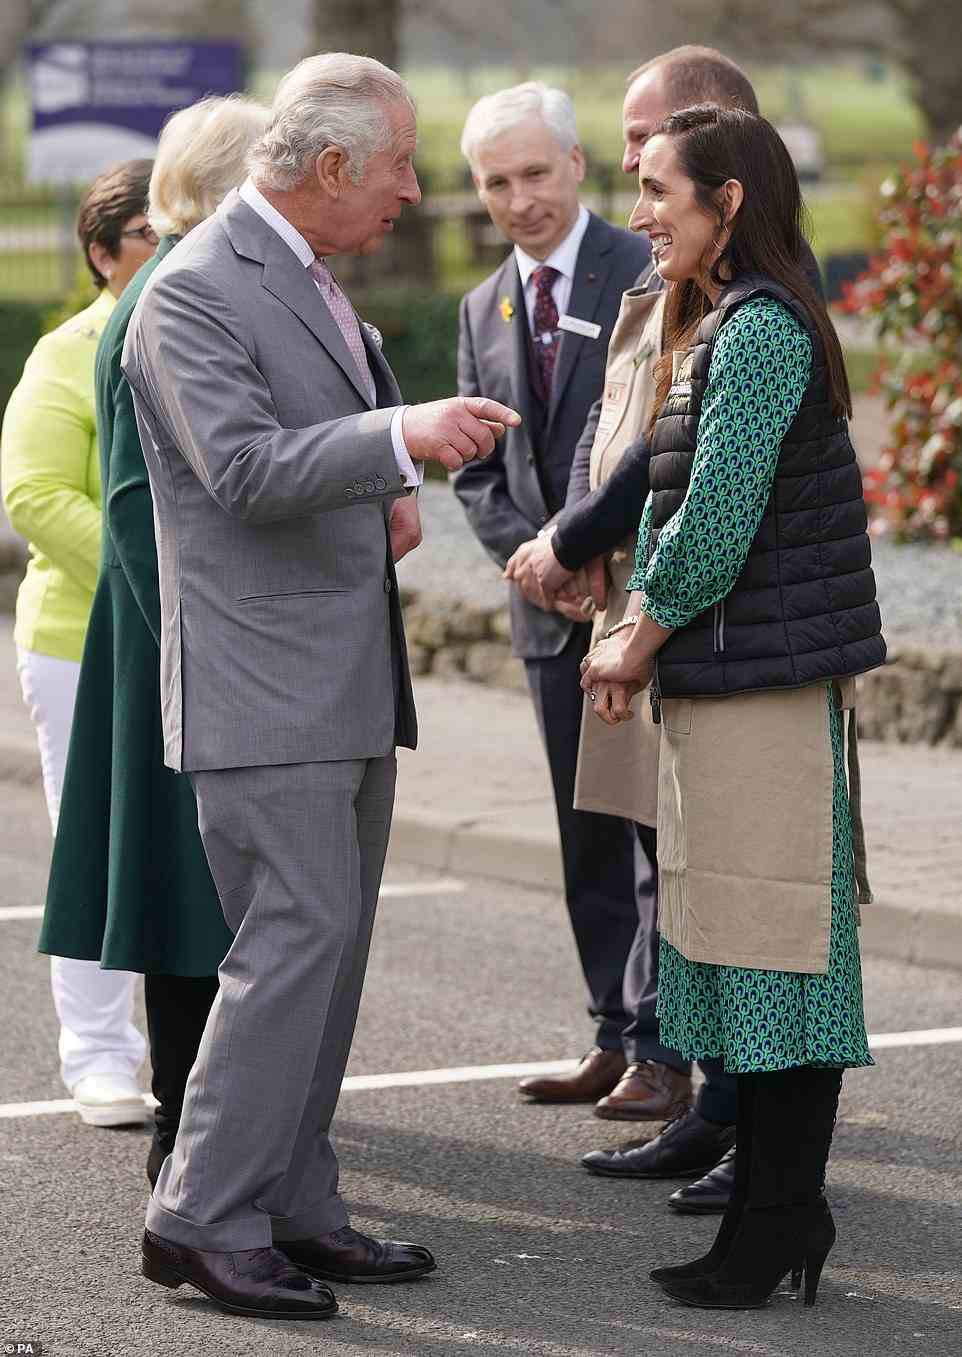 Charles and Camilla chatted with the enthusiastic farmers and locals who greeted them at thre market this morning